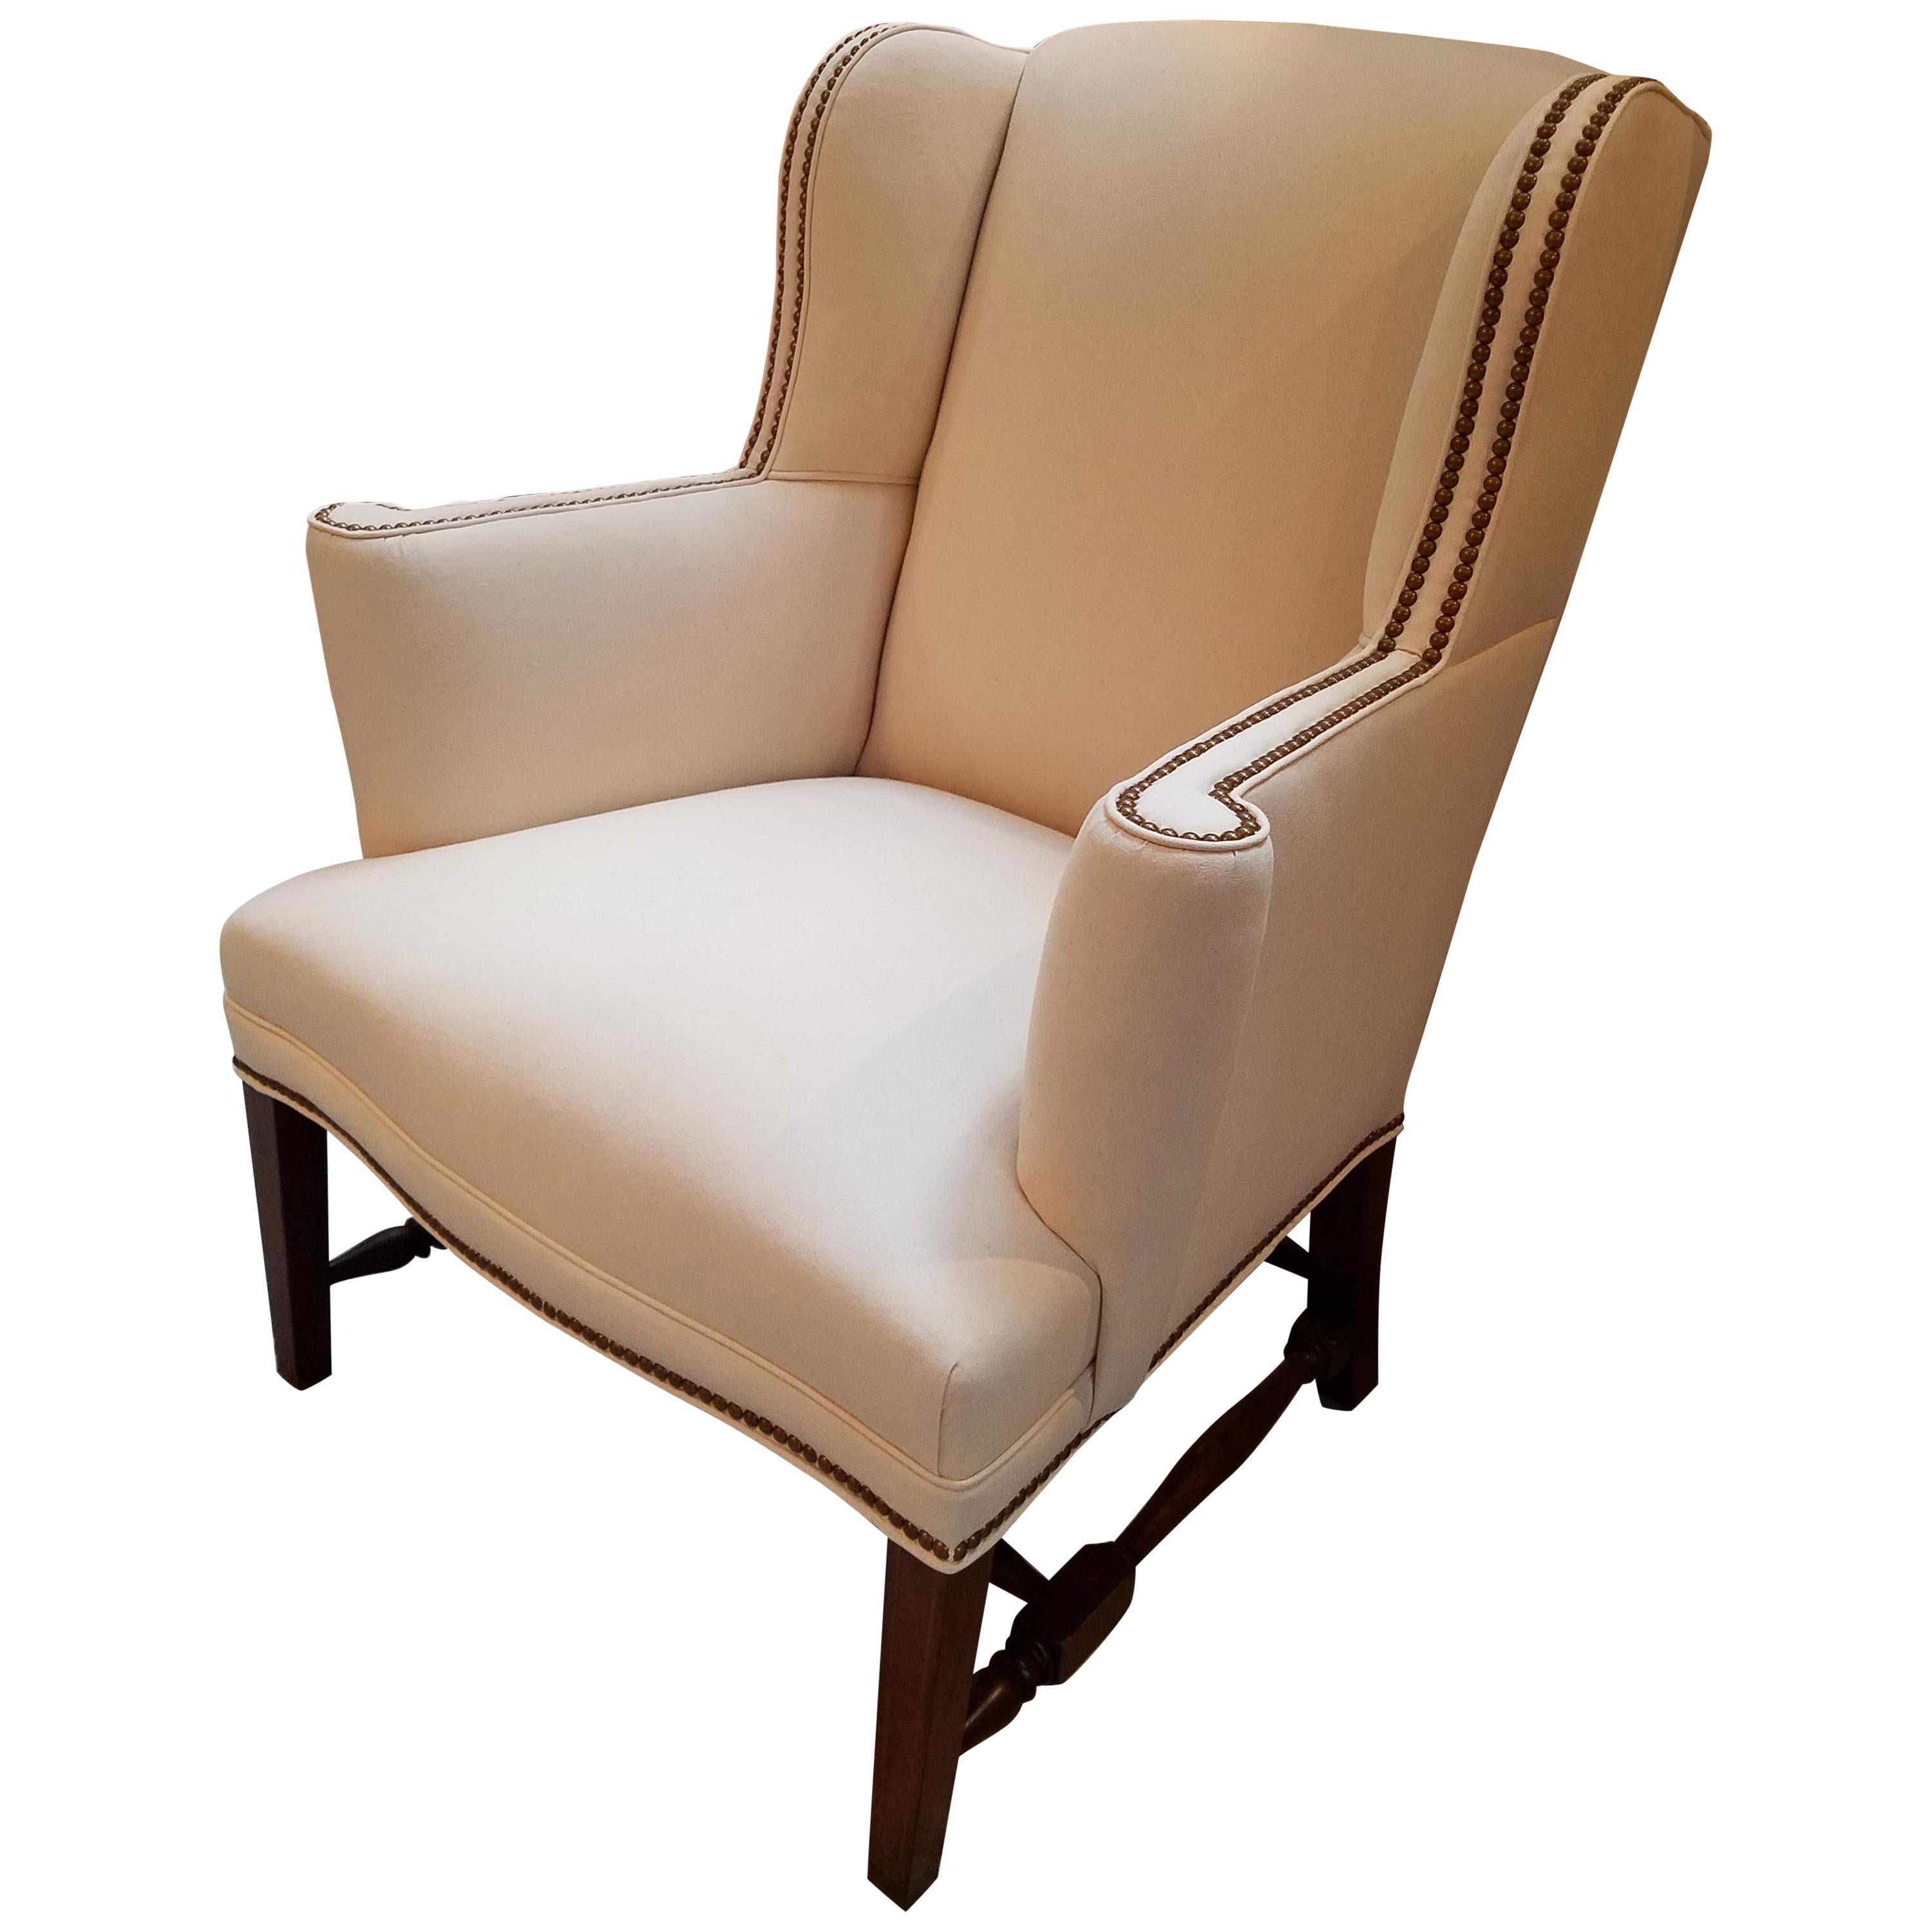 Classic American Walnut Wing Chair Newly Recovered with Brass Nail Head Trim